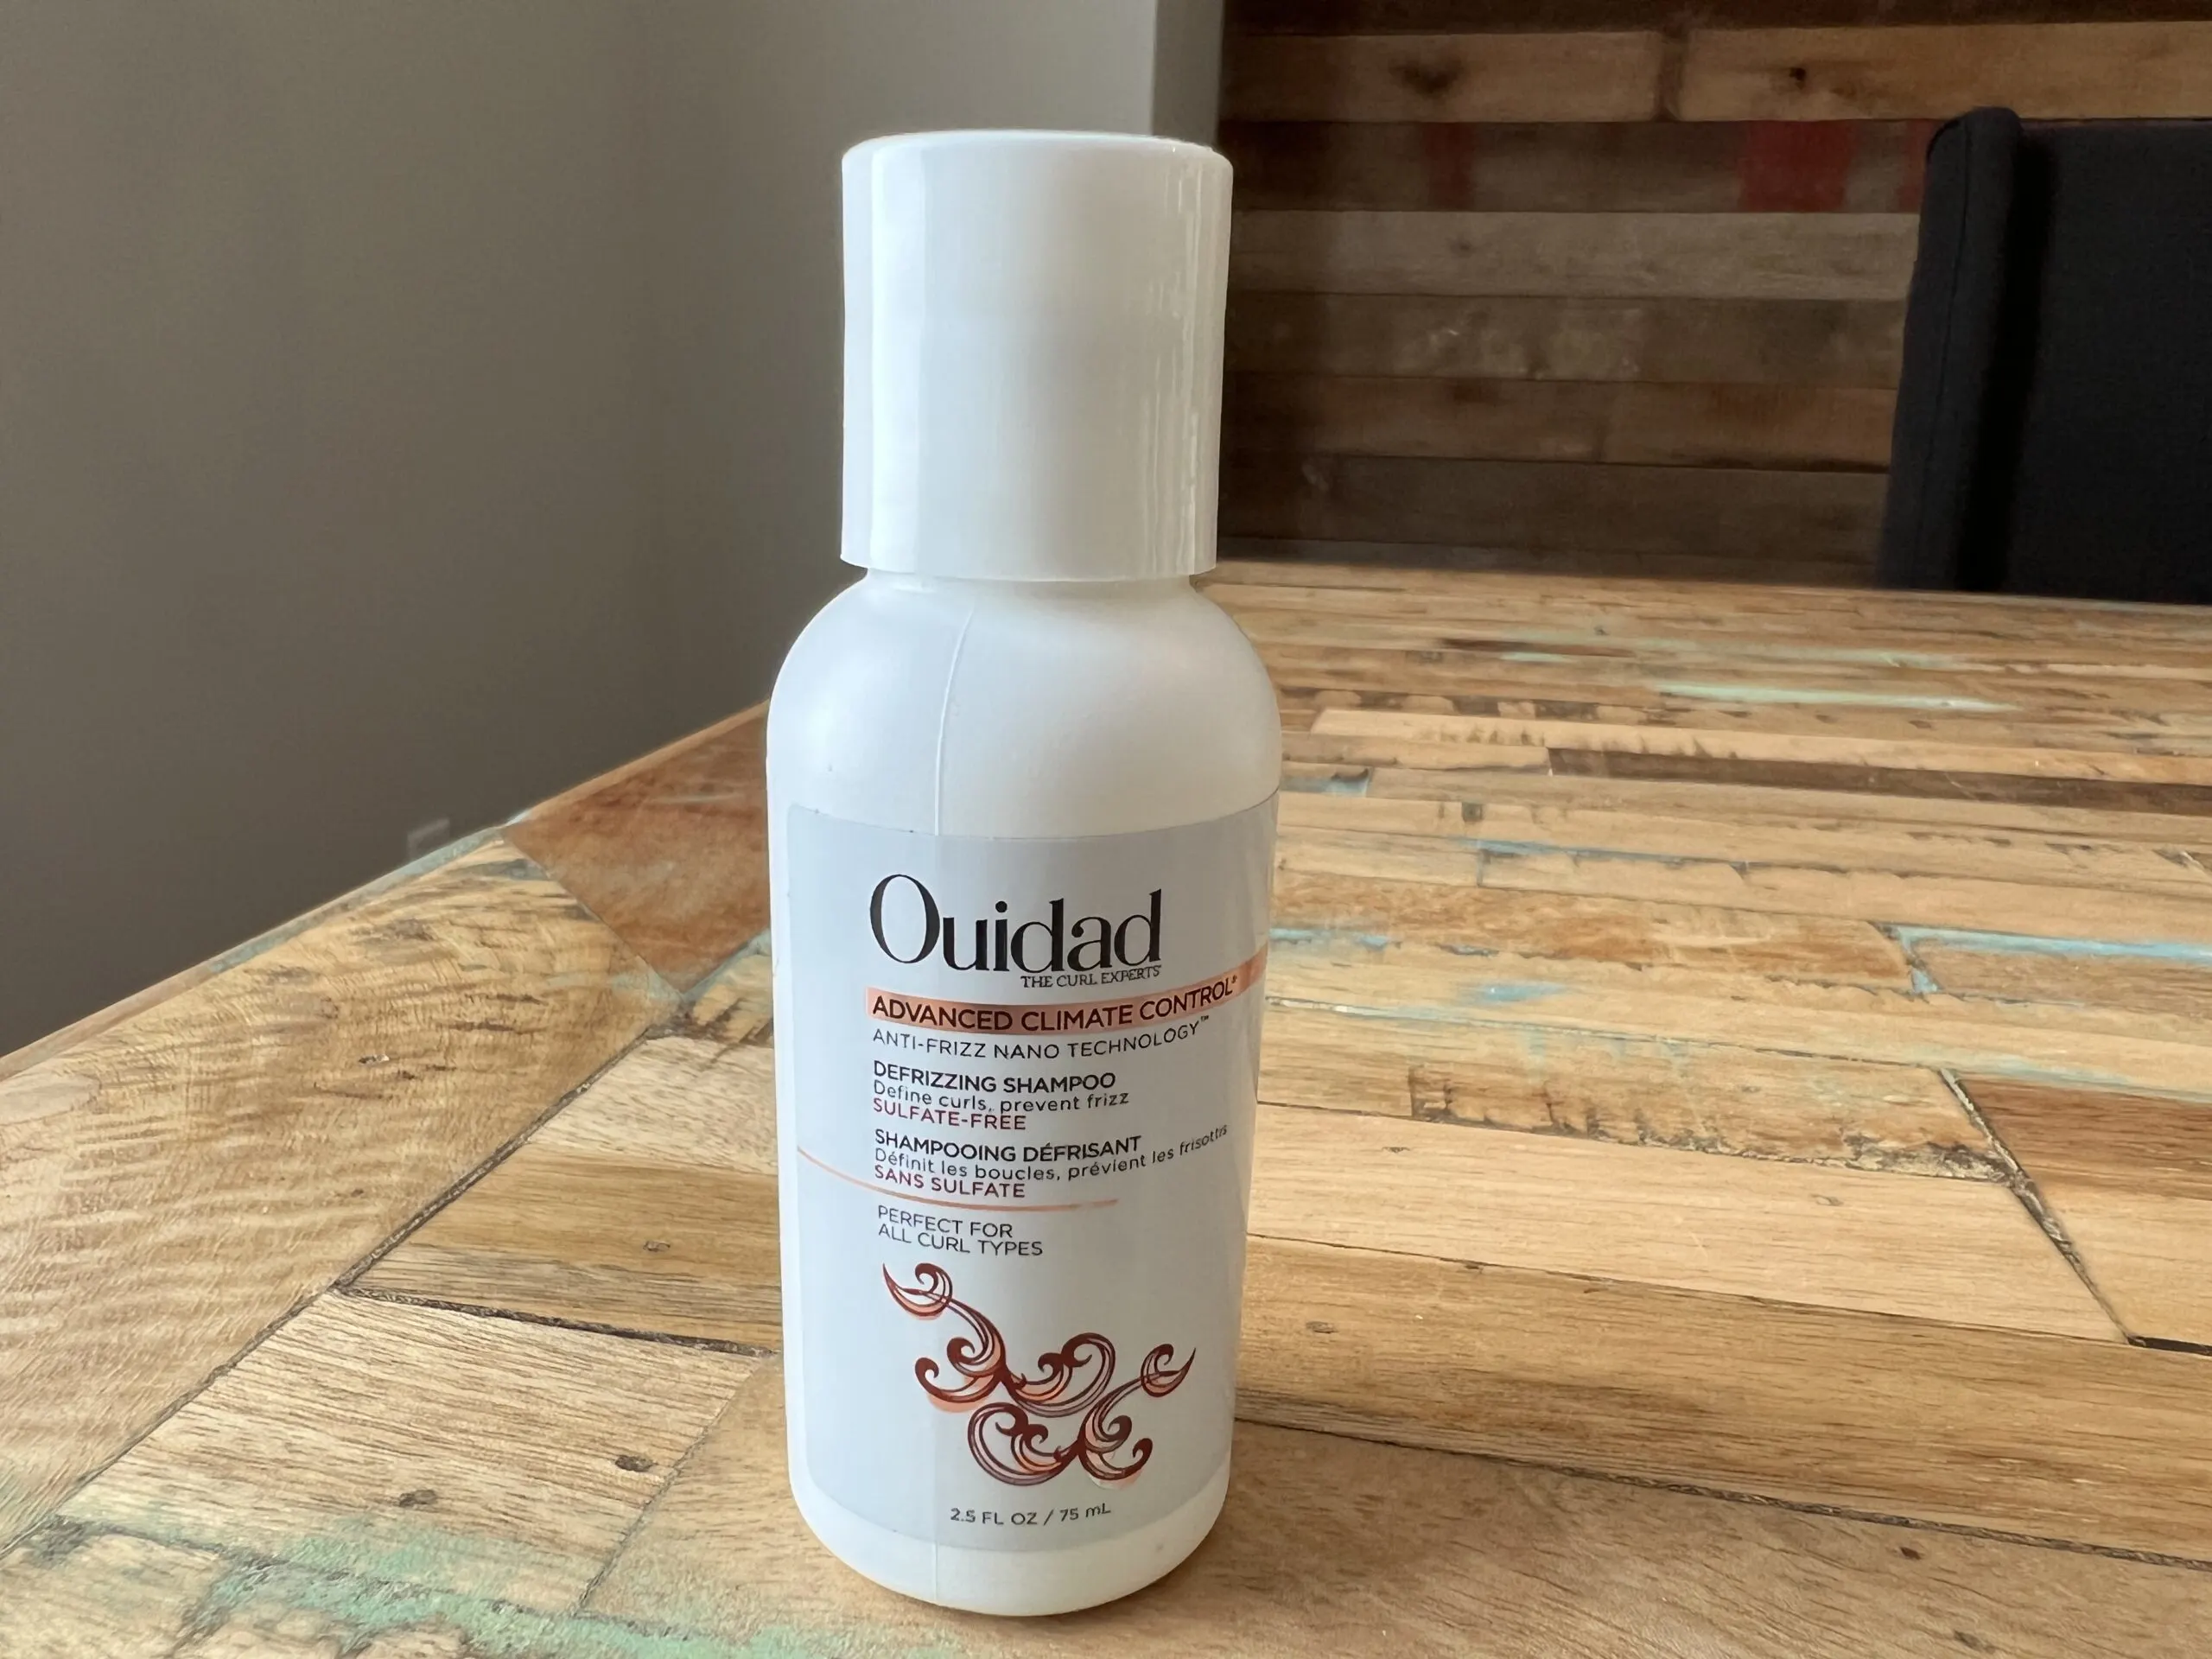 Ouidad: The Curl Experts - Defrizzing shampoo with advanced climate control and anti-frizz nano technology can define curls and prevent frizz. 